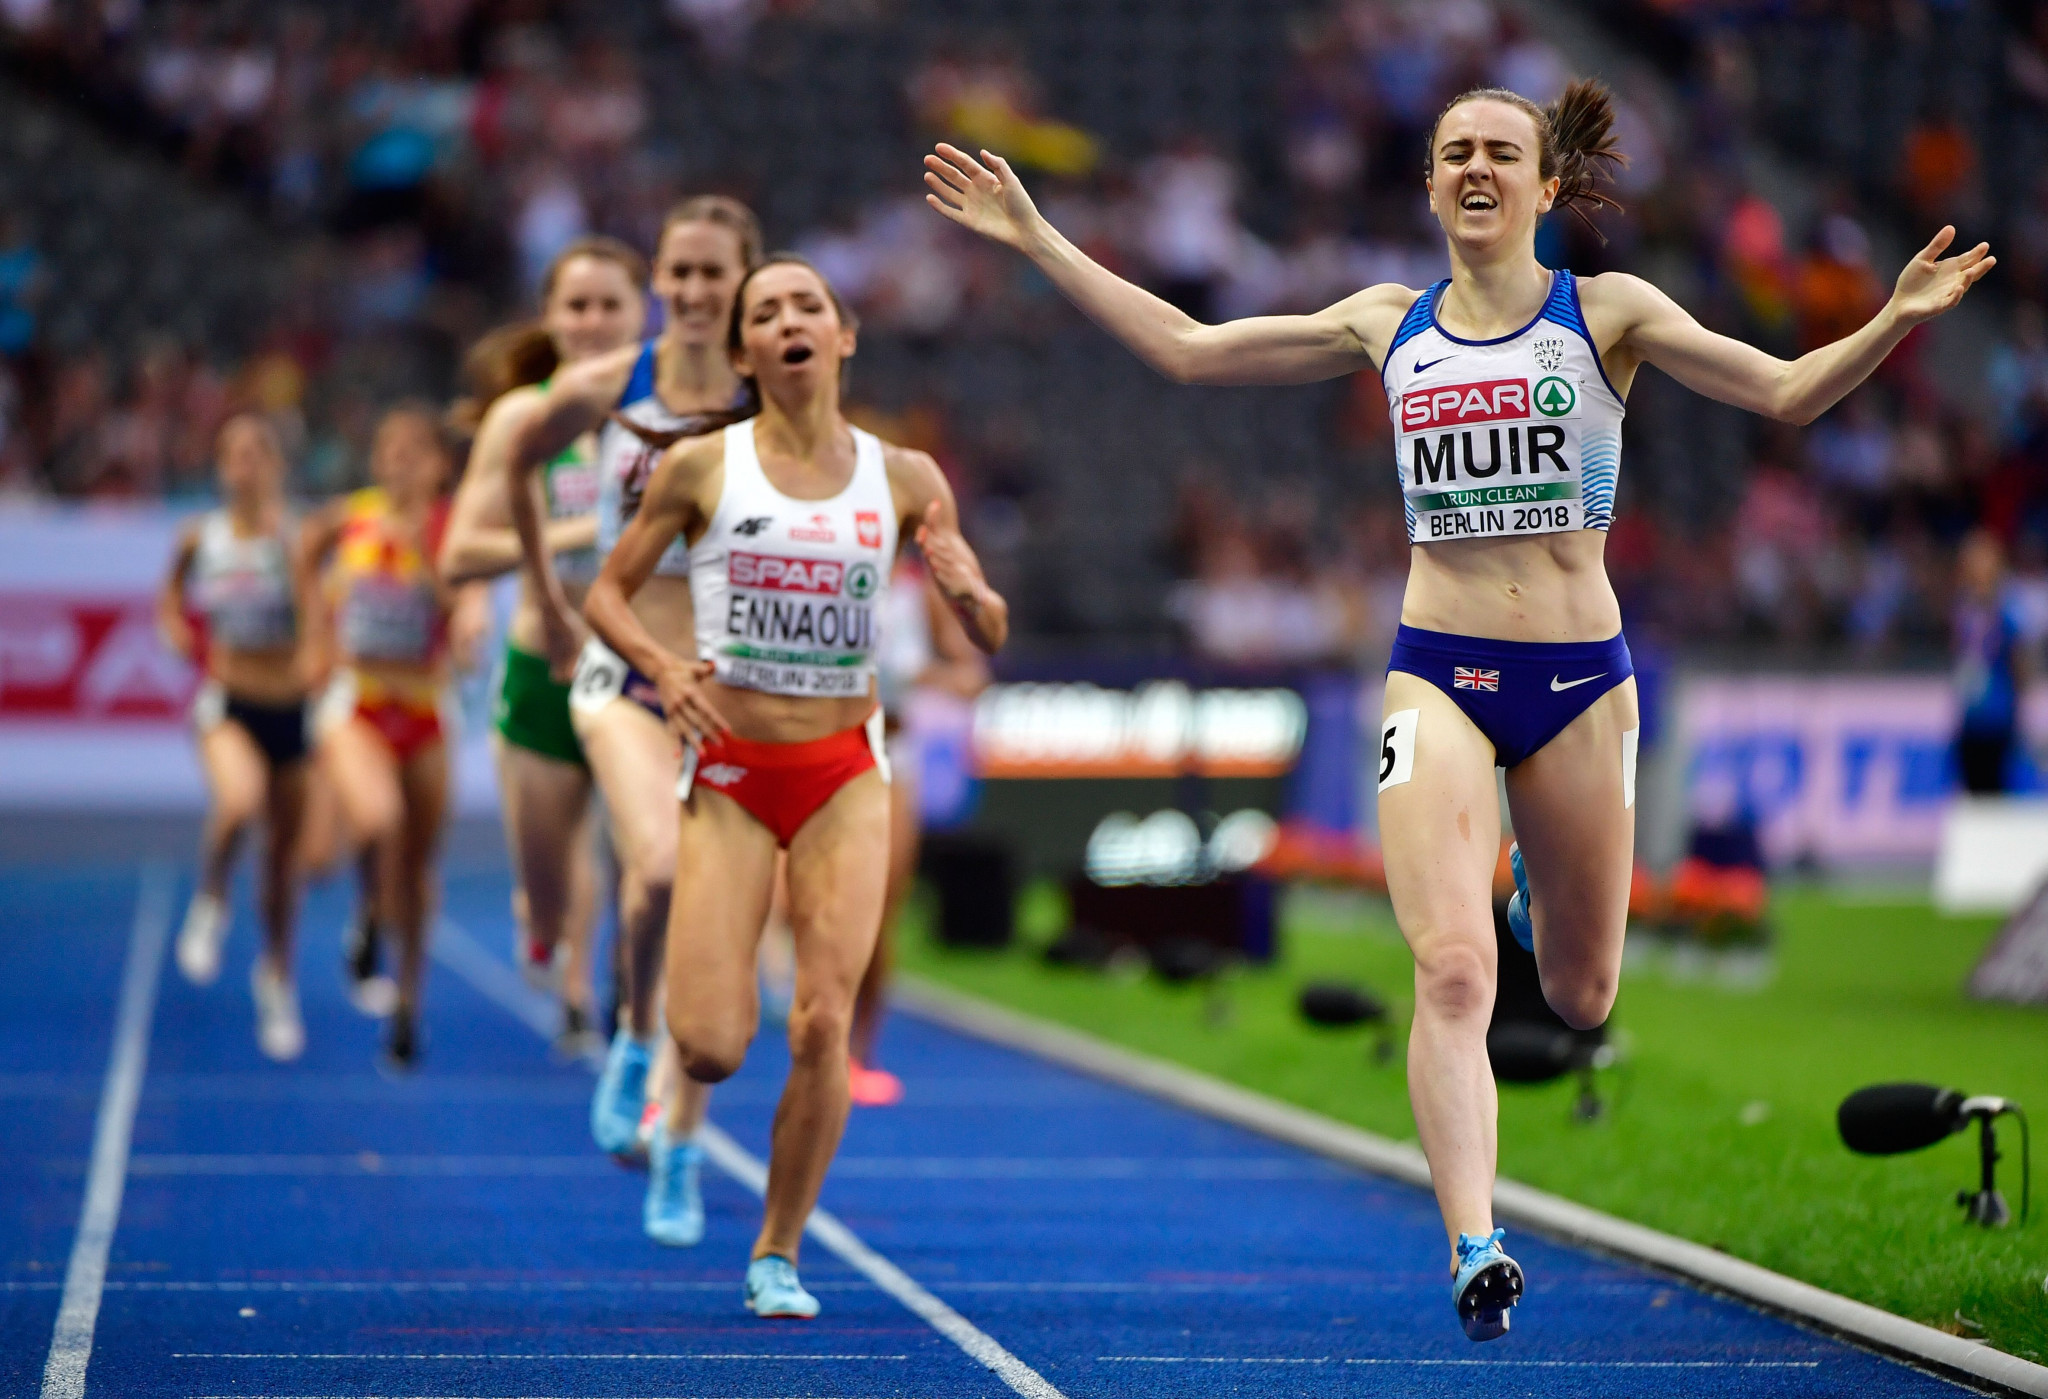 Great Britain's Laura Muir was among the winners on the final night of athletics in Berlin, crossing the line first in the women's 1,500m final ©Getty Images